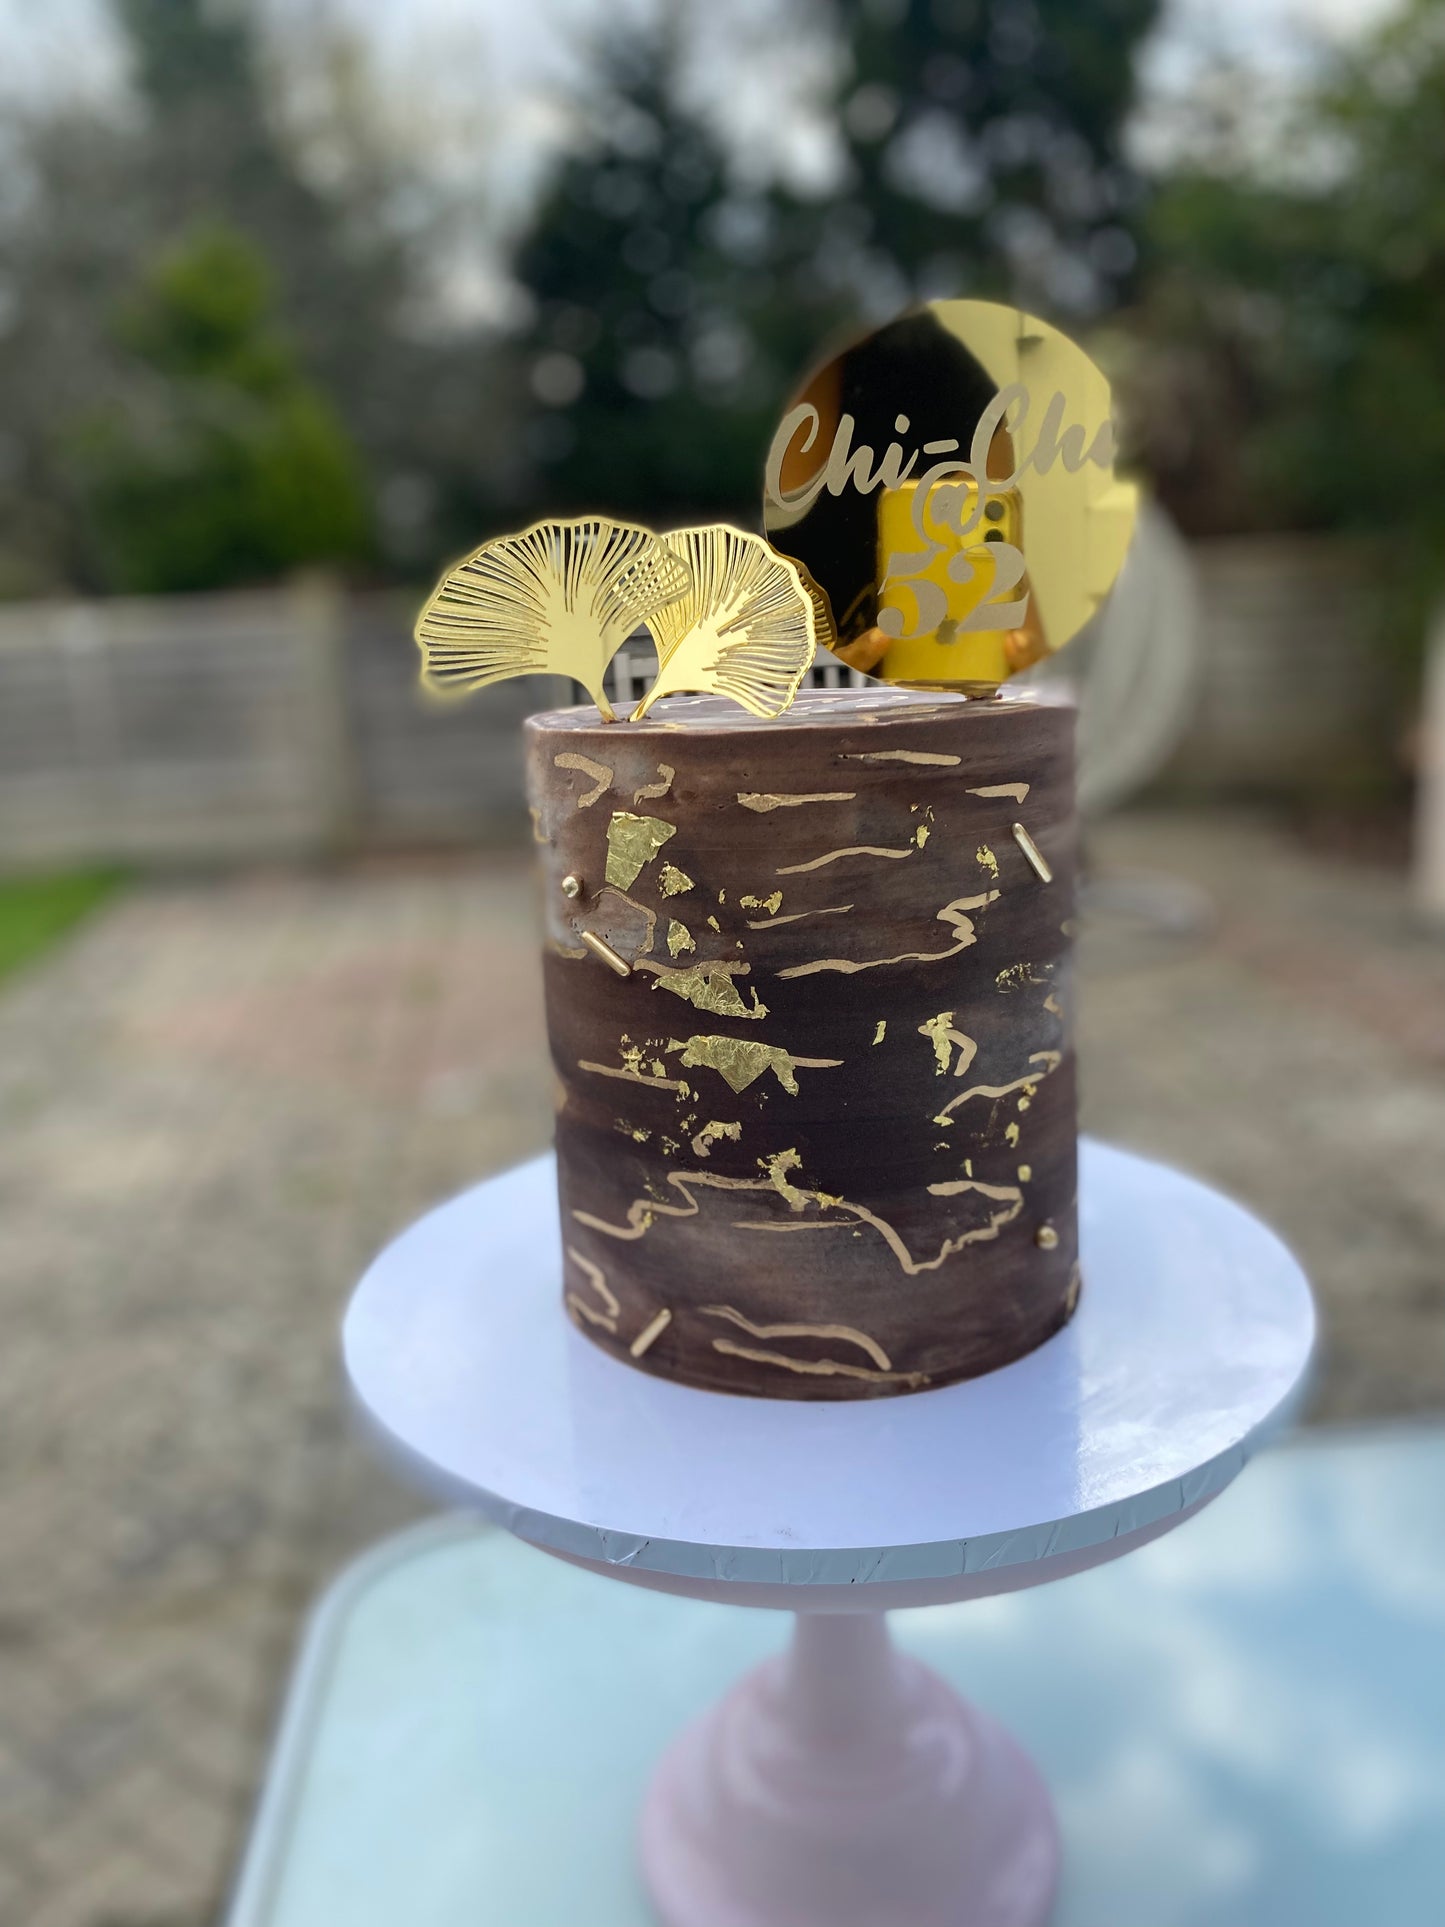 Chocolate brown and gold marble effect buttercream cake